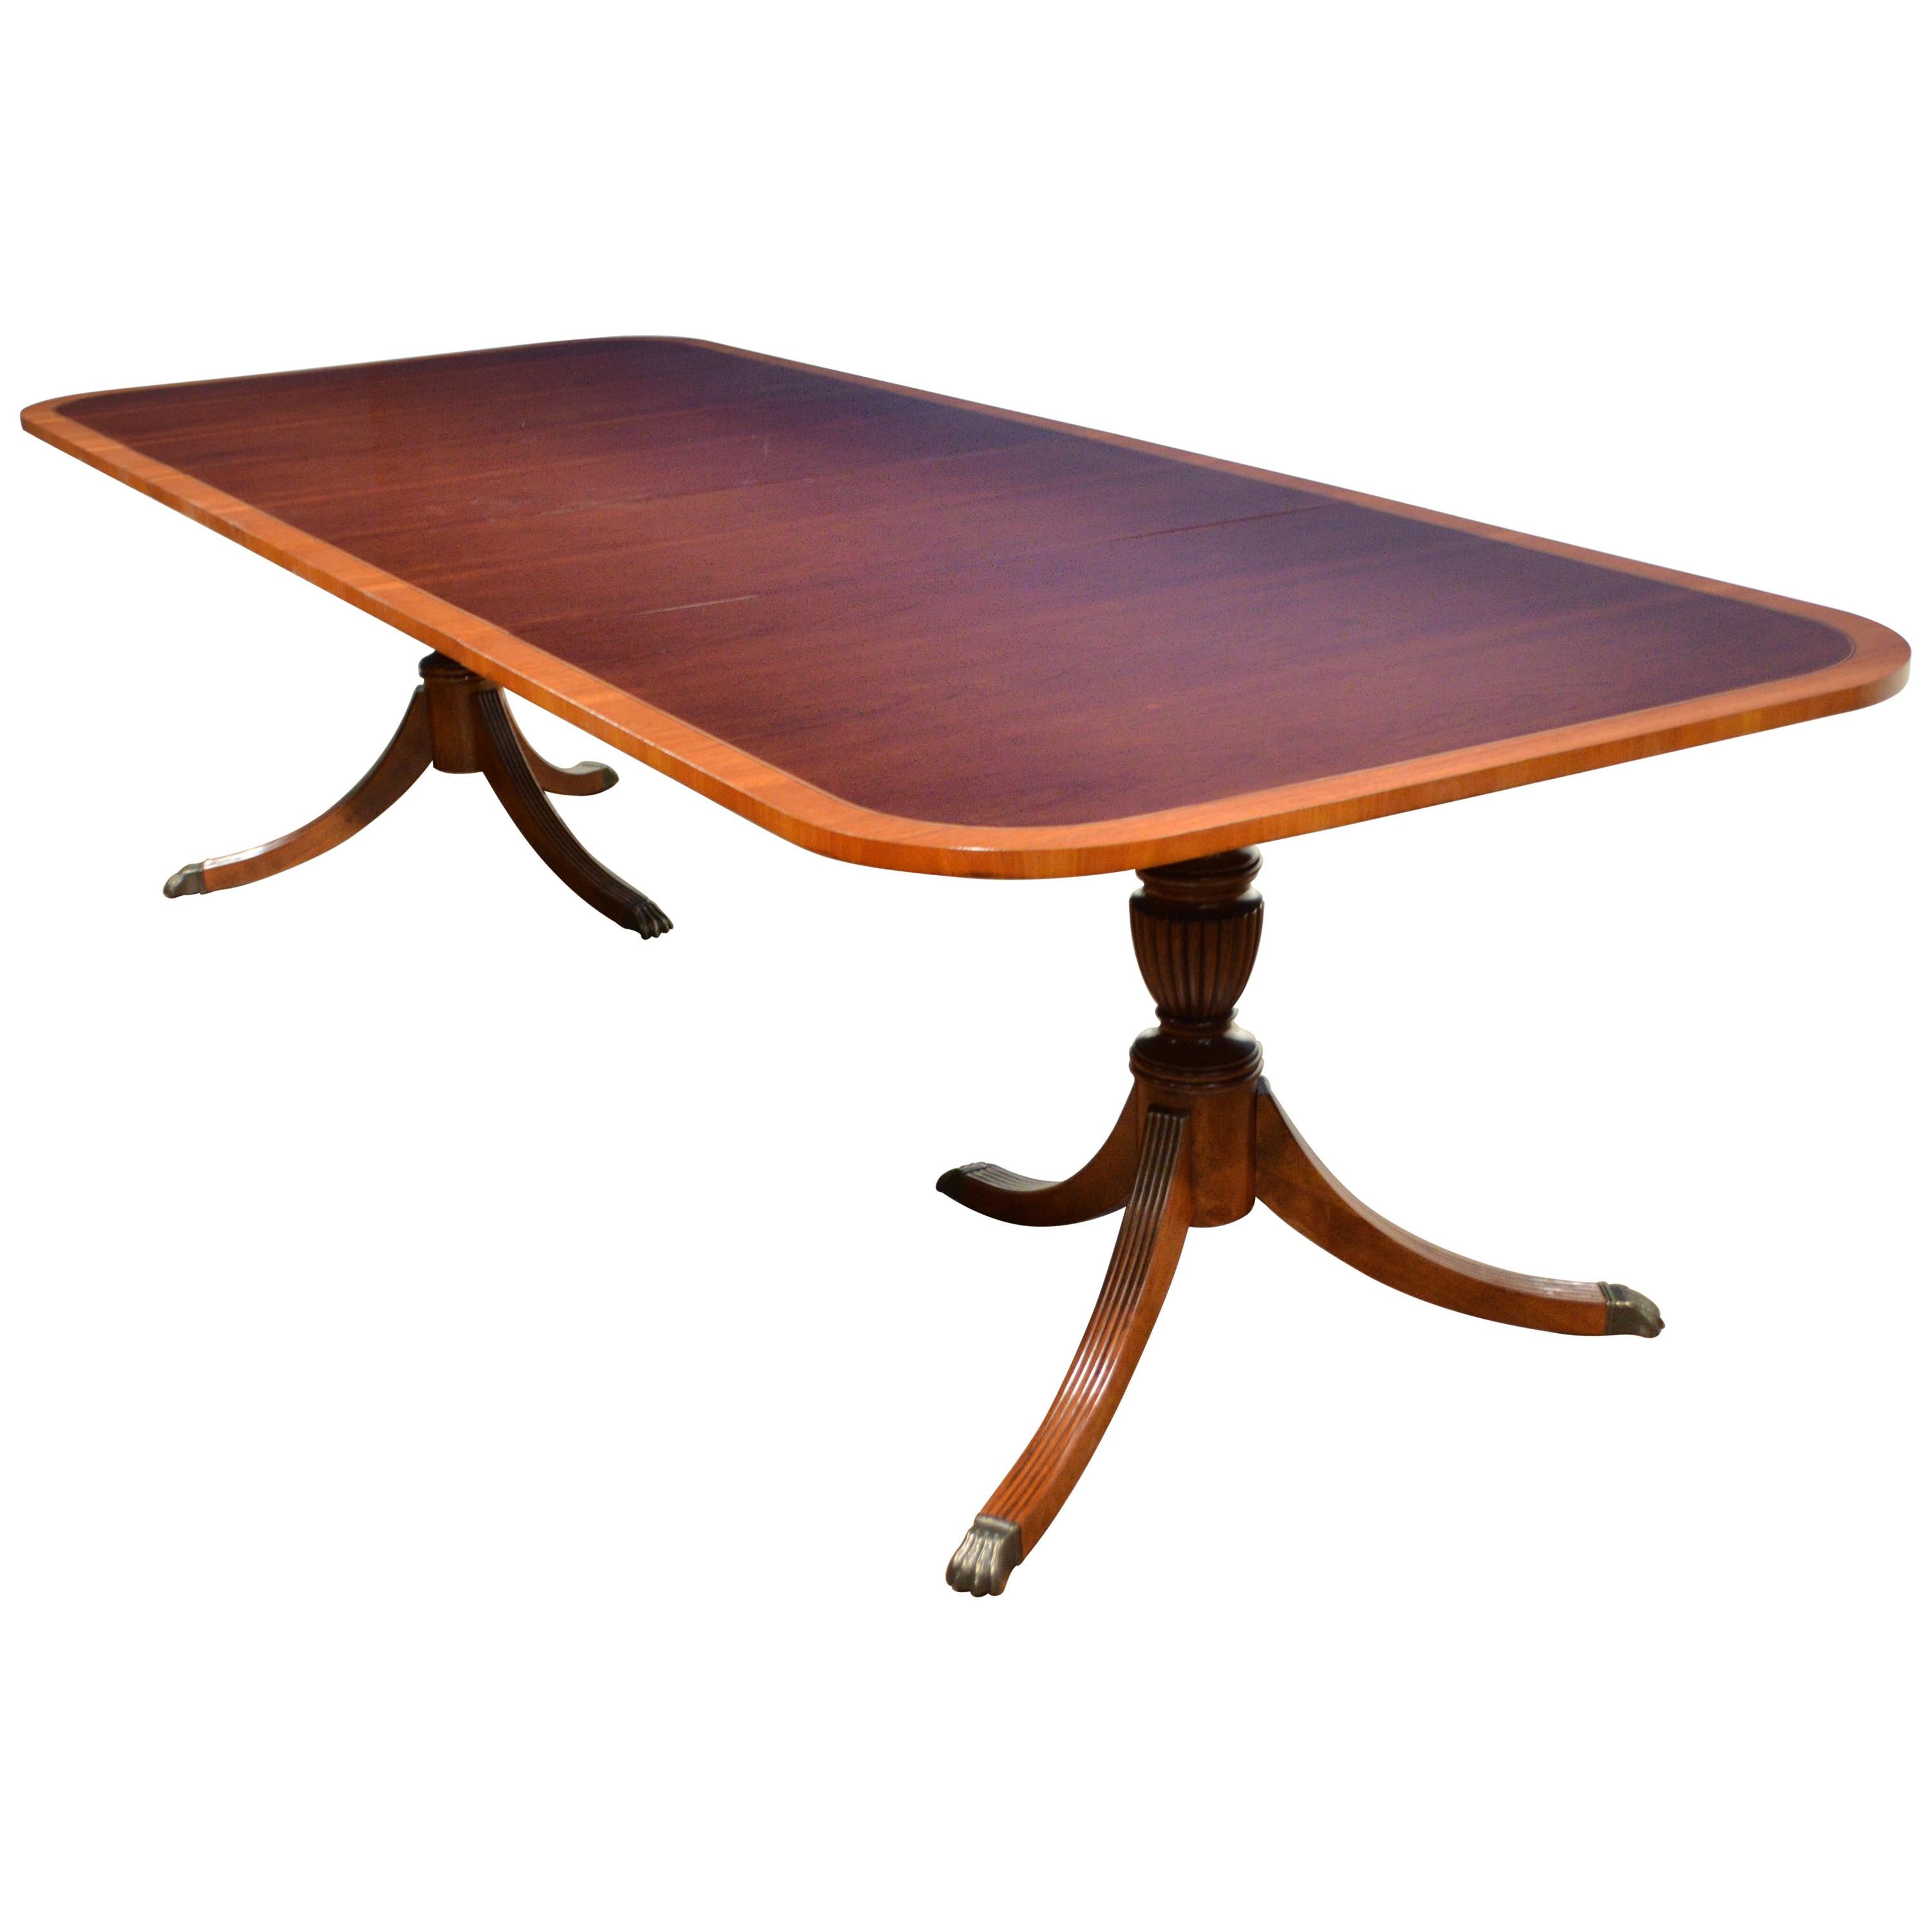 Banded Cathedral Mahogany Georgian Style Pedestal Dining Table by Leighton Hall